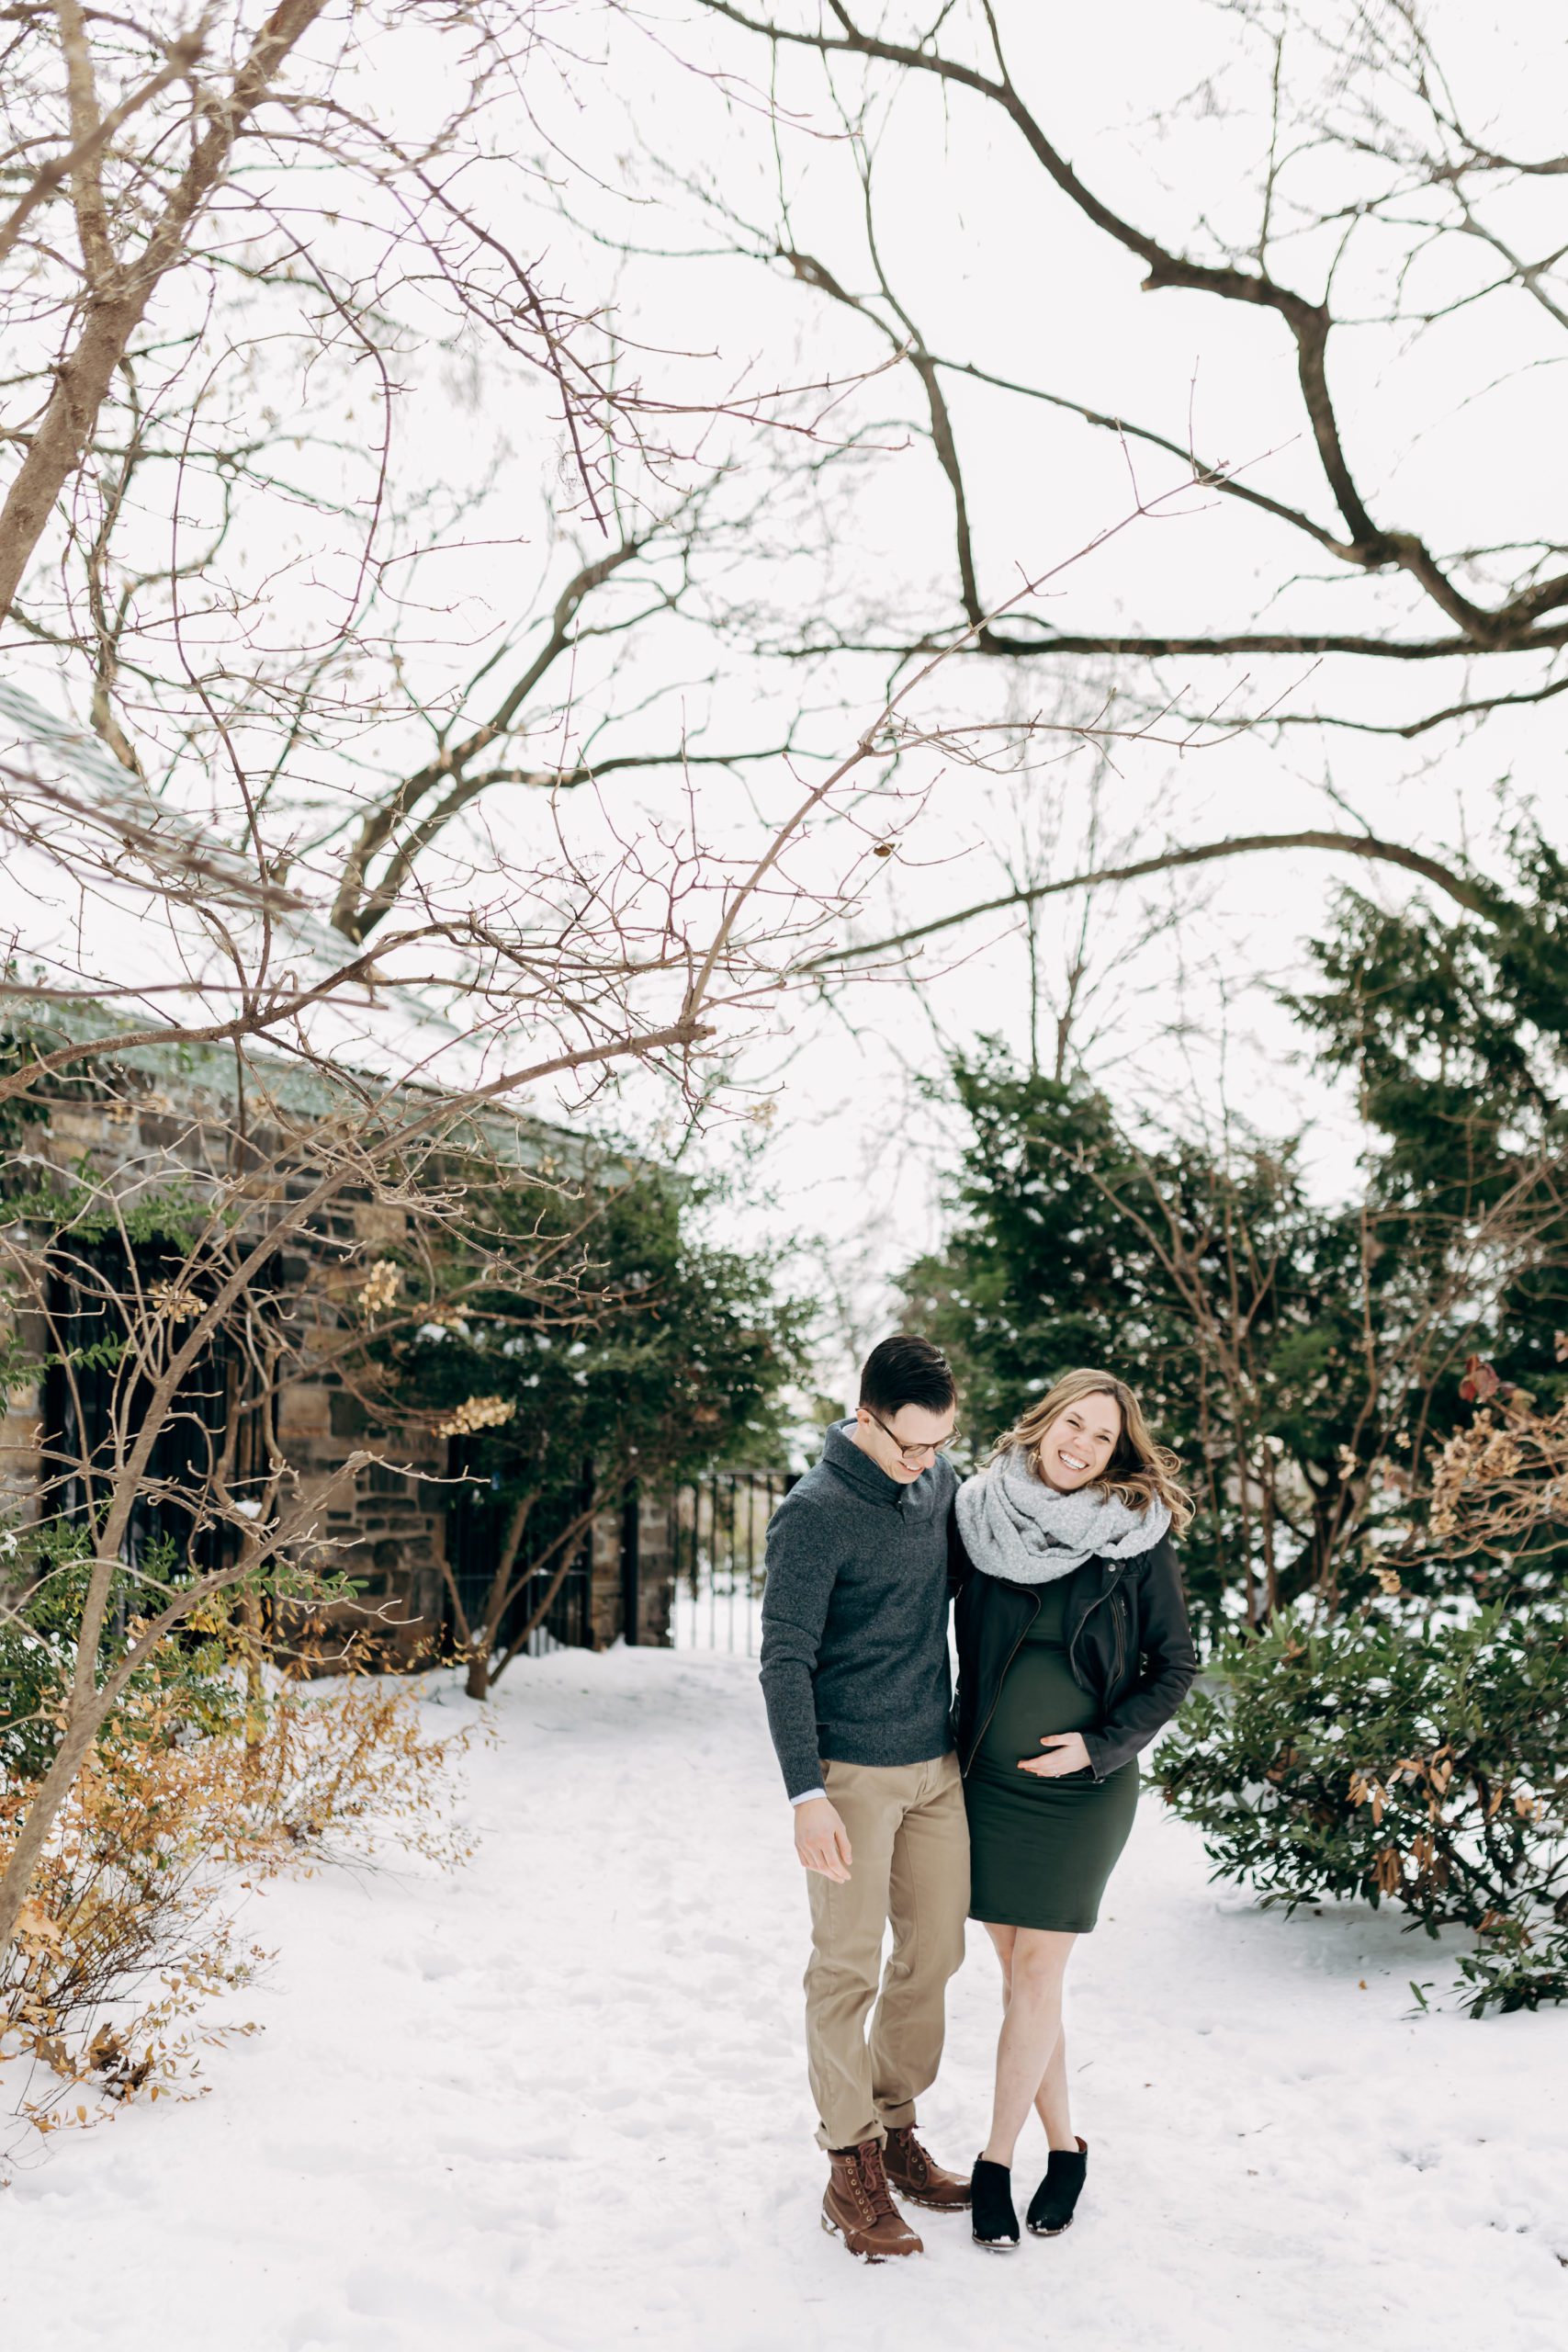 Winter couples maternity session in New York City Westchester County as a couple walks down a snowy frozen path bundled up in sweaters and scarves and cuddling close to stay warm